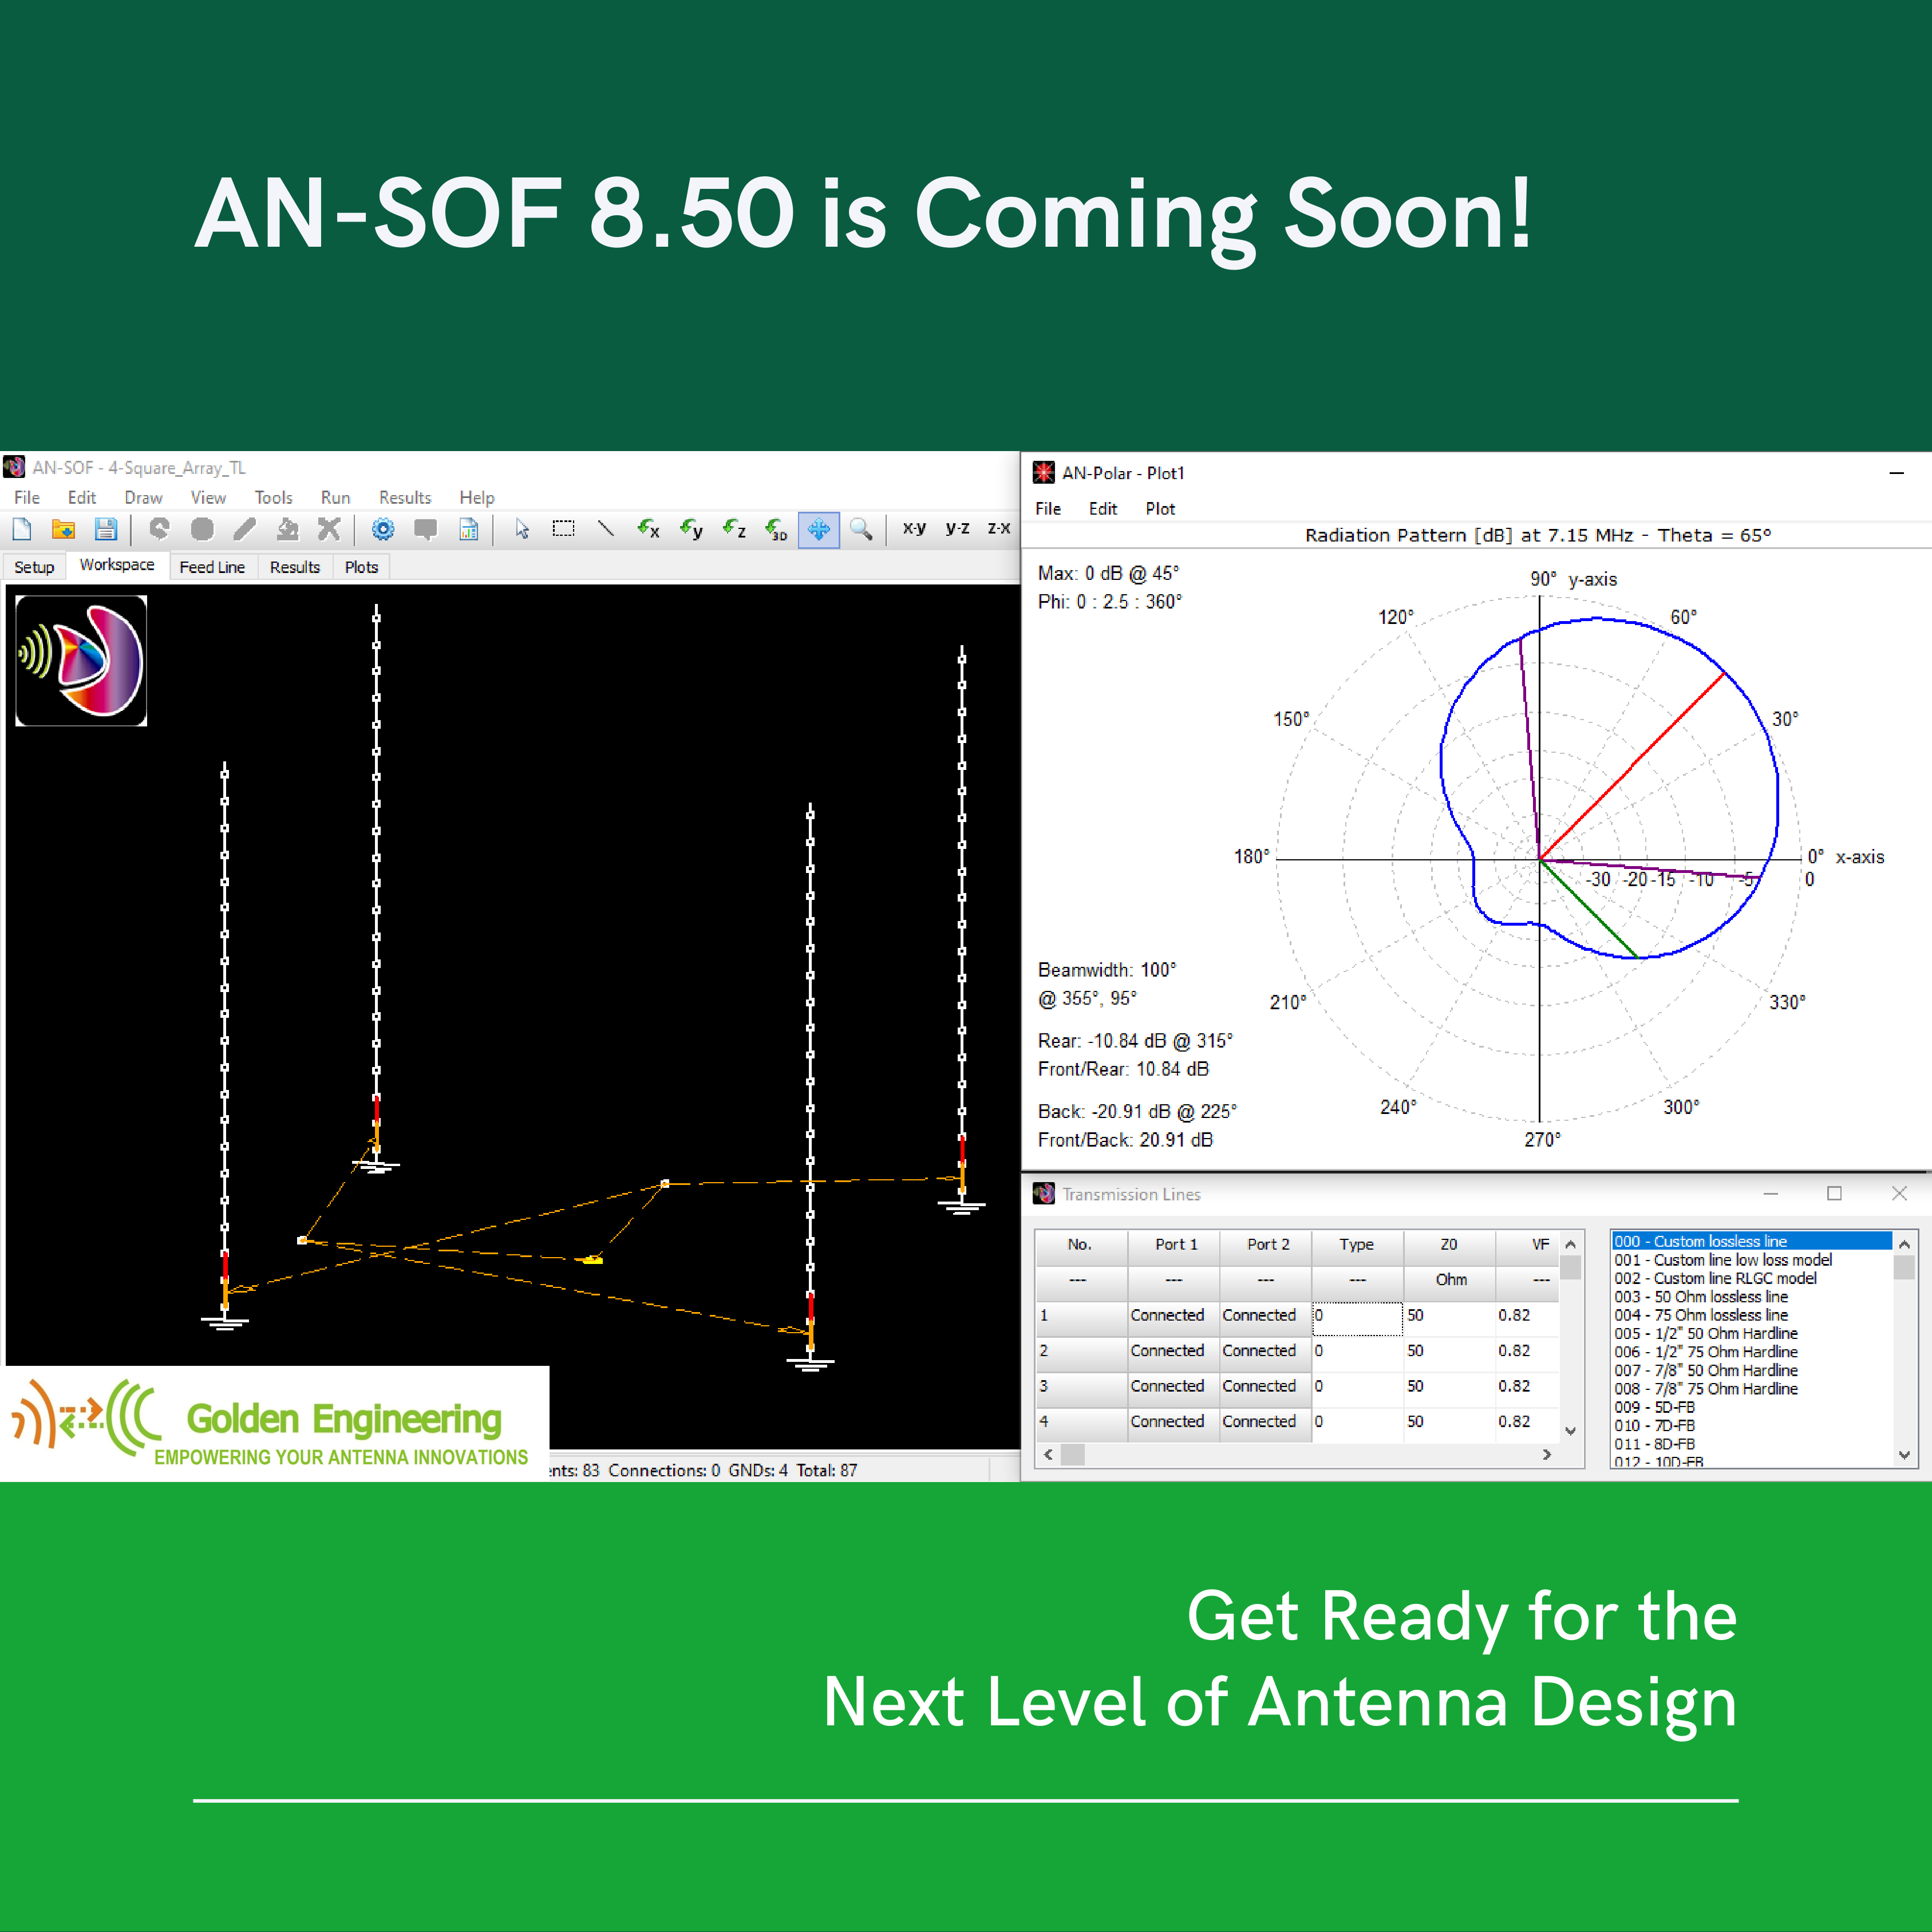 Get Ready for the Next Level of Antenna Design: AN-SOF 8.50 is Coming Soon!